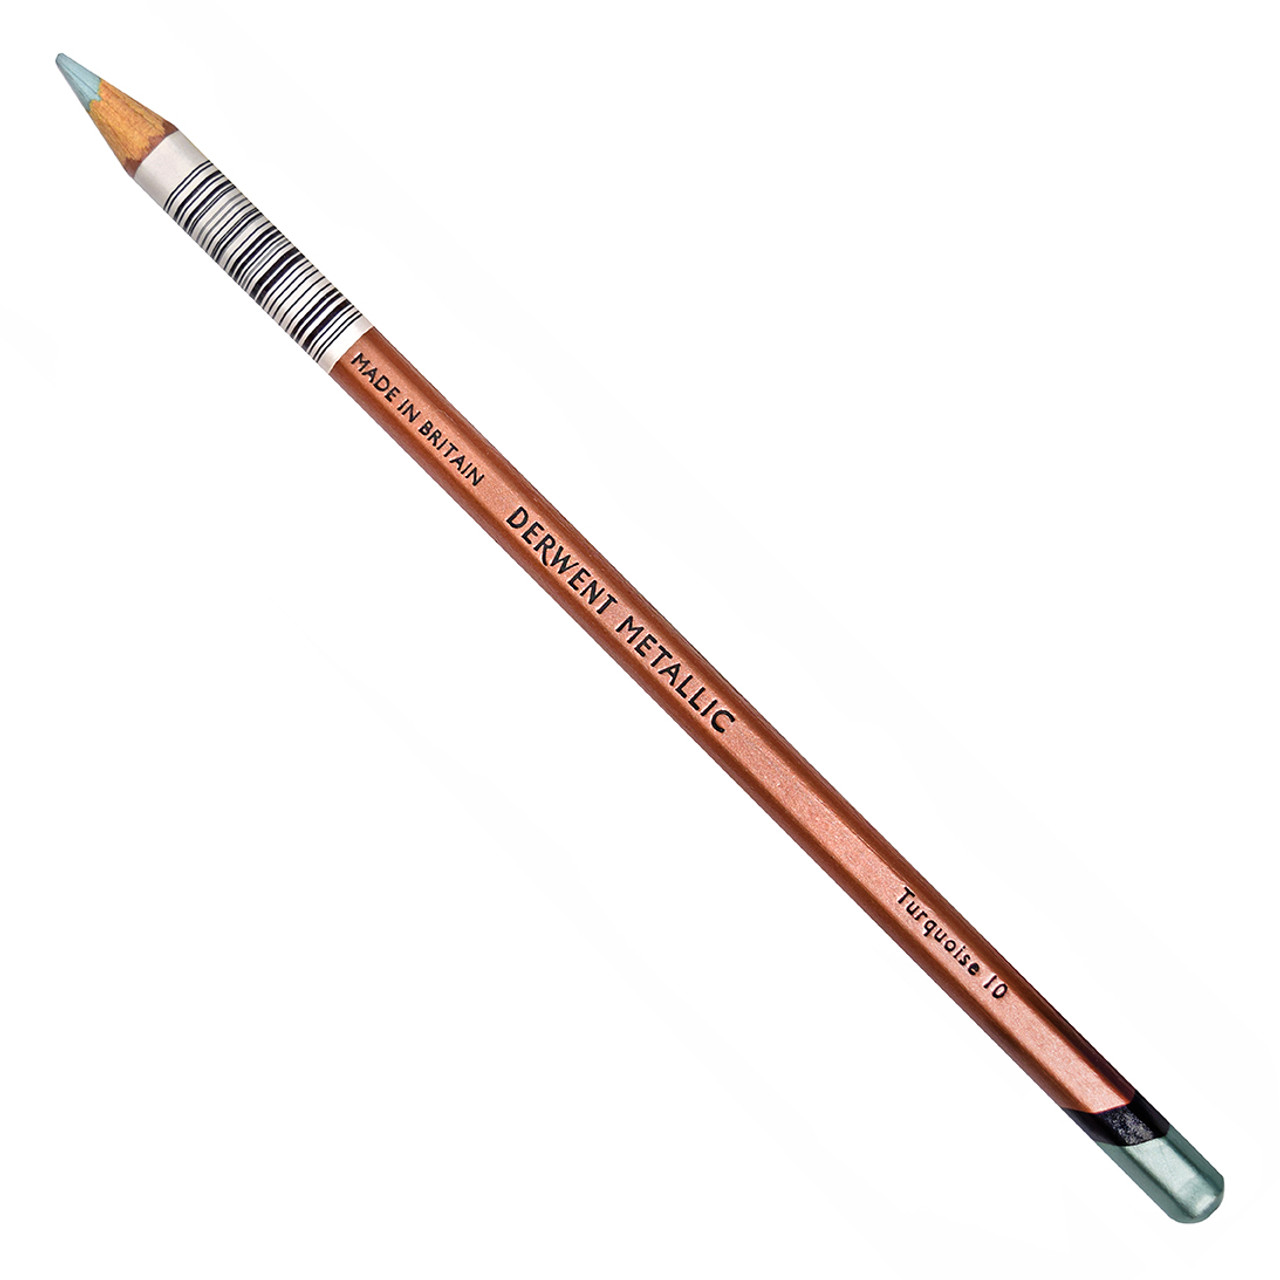 Artistic Blog - learn how to draw with colored pencils: Derwent